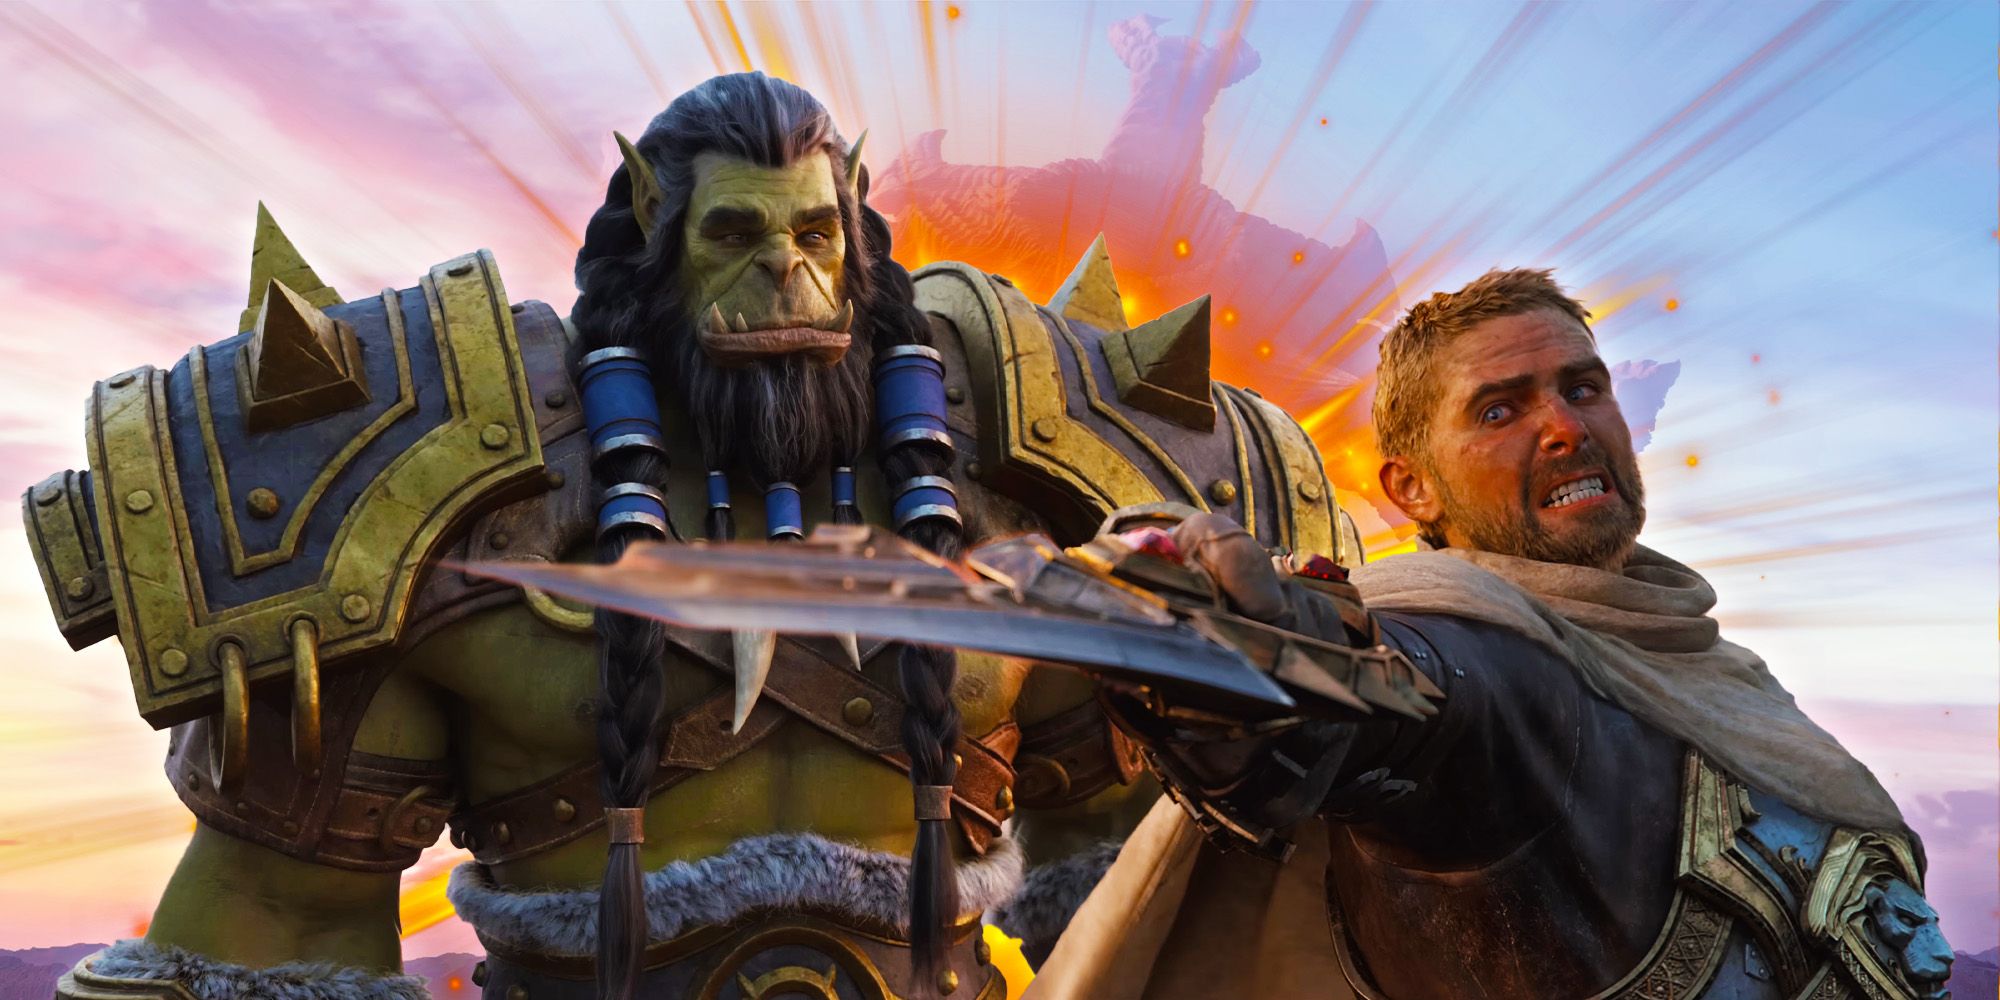 Thrall and Anduin in front of the Sword of Sargeras